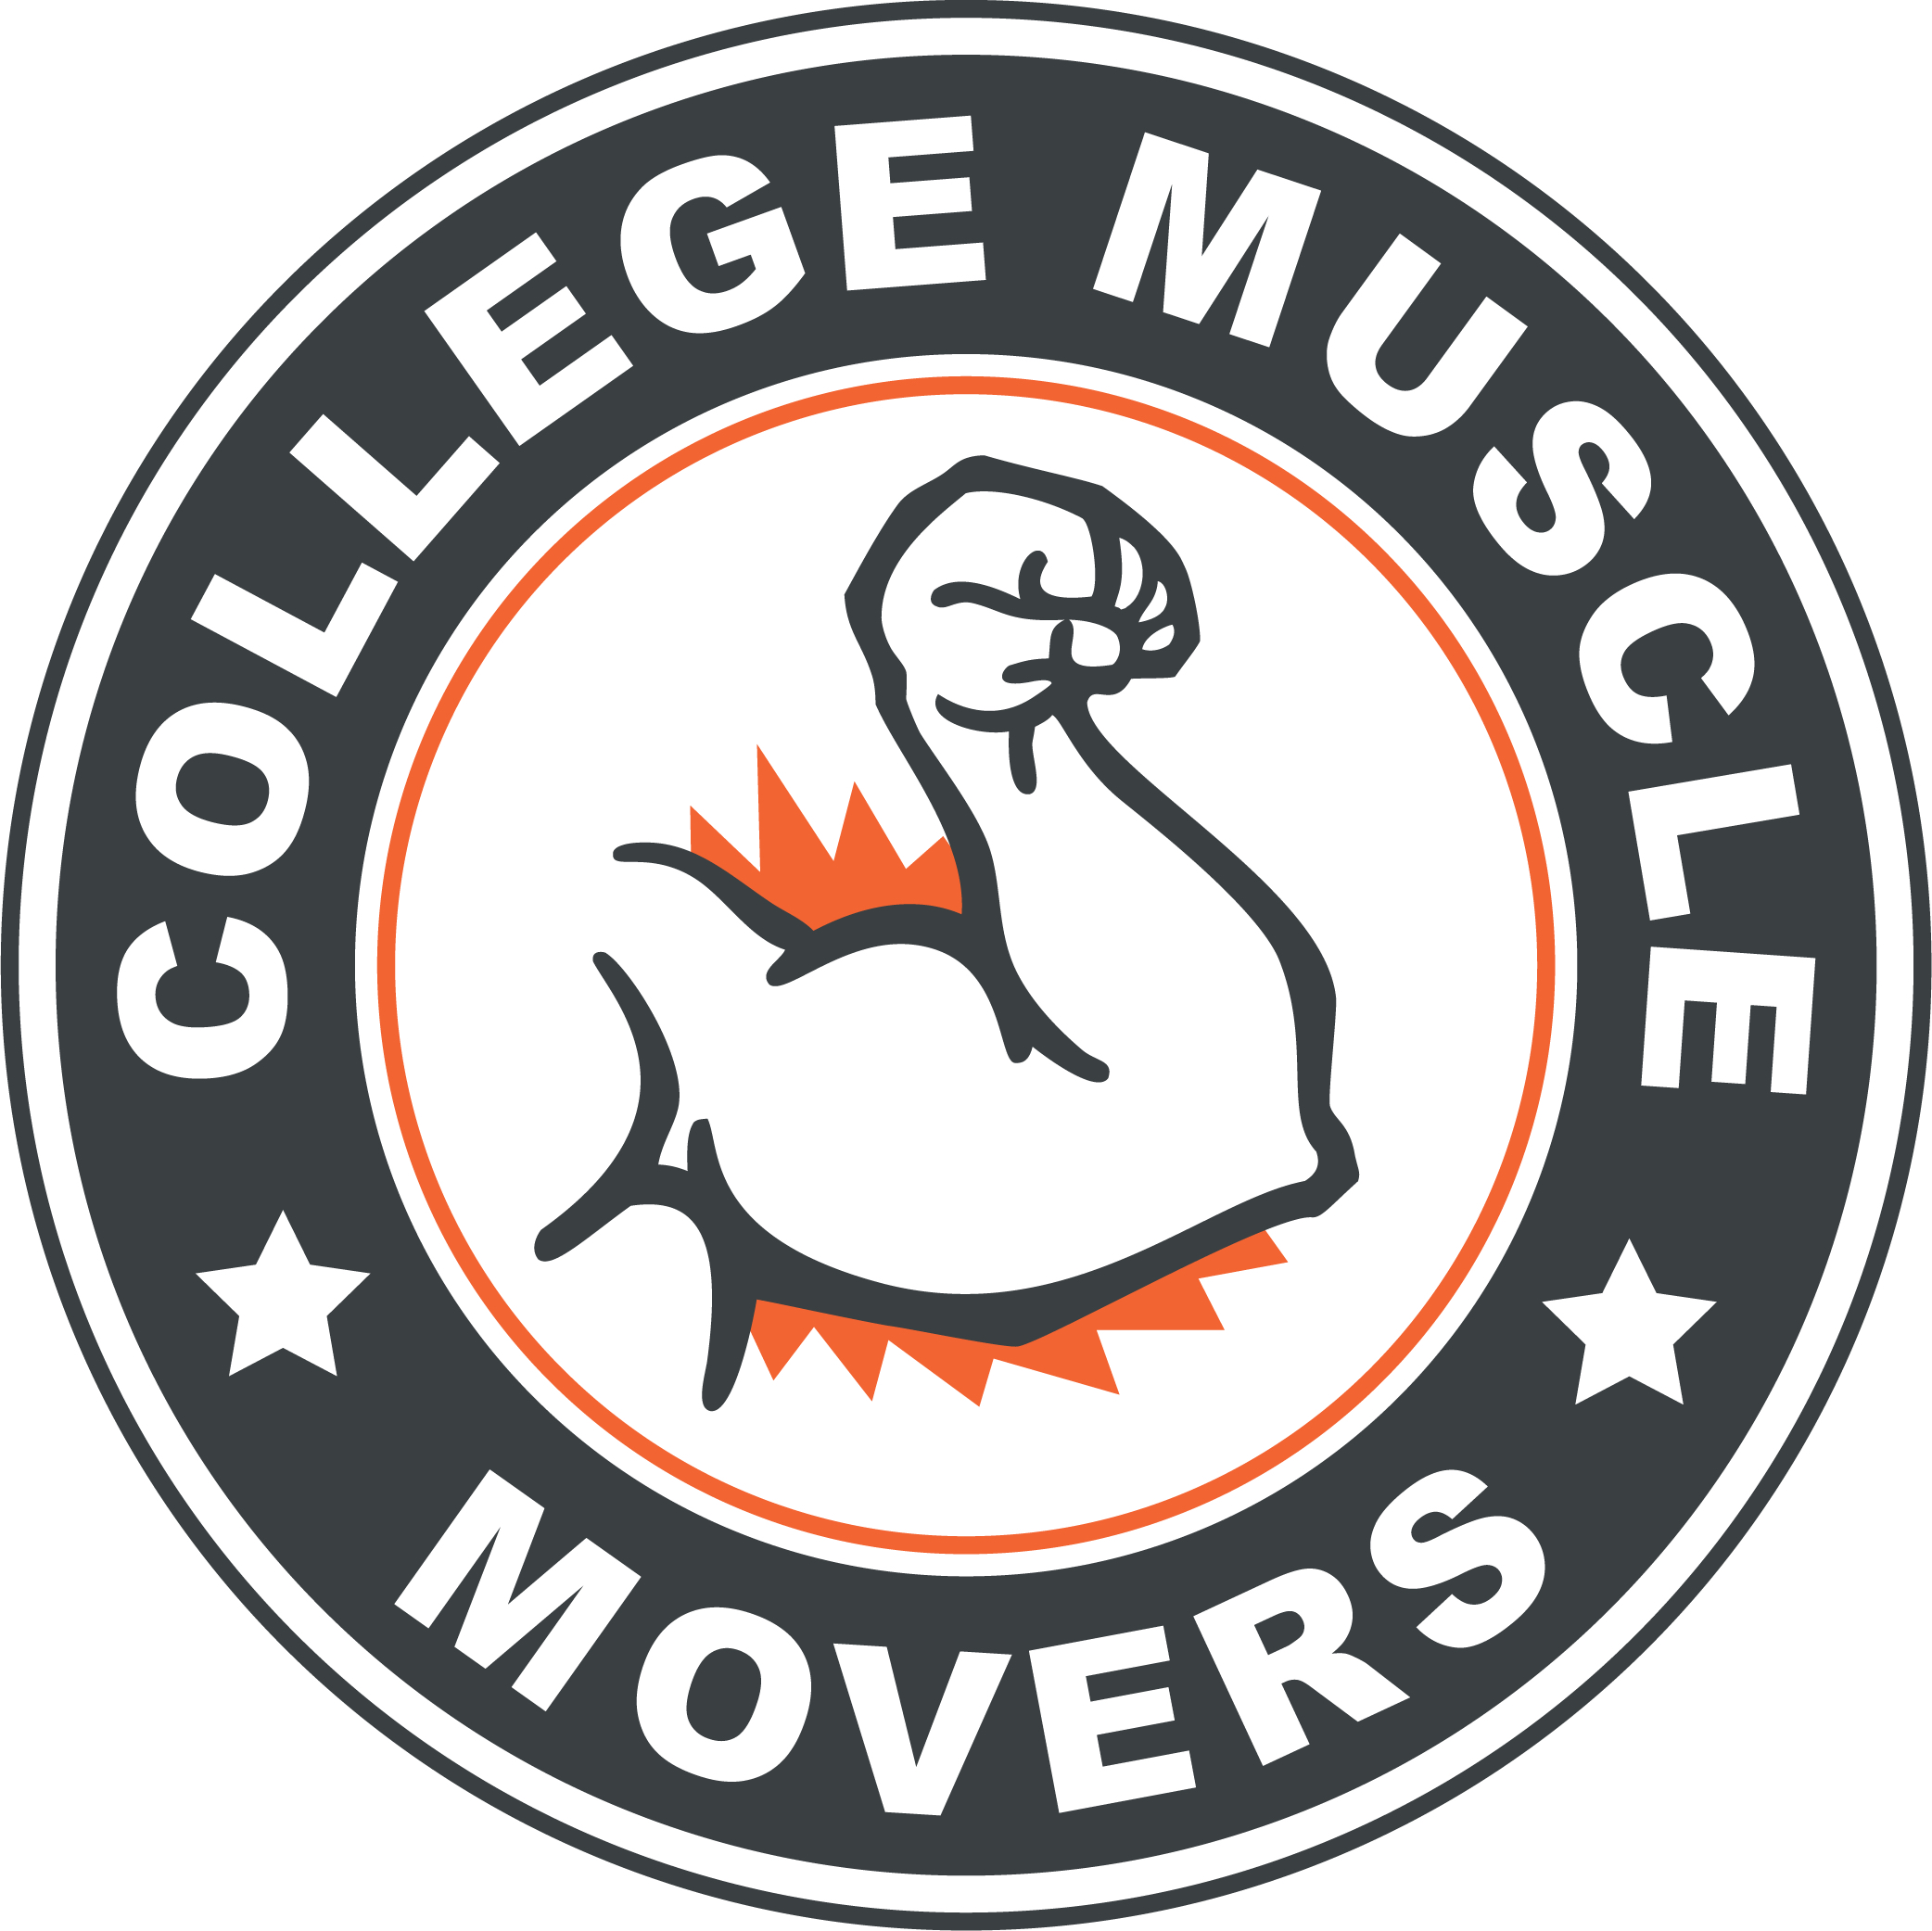 College Muscle Movers